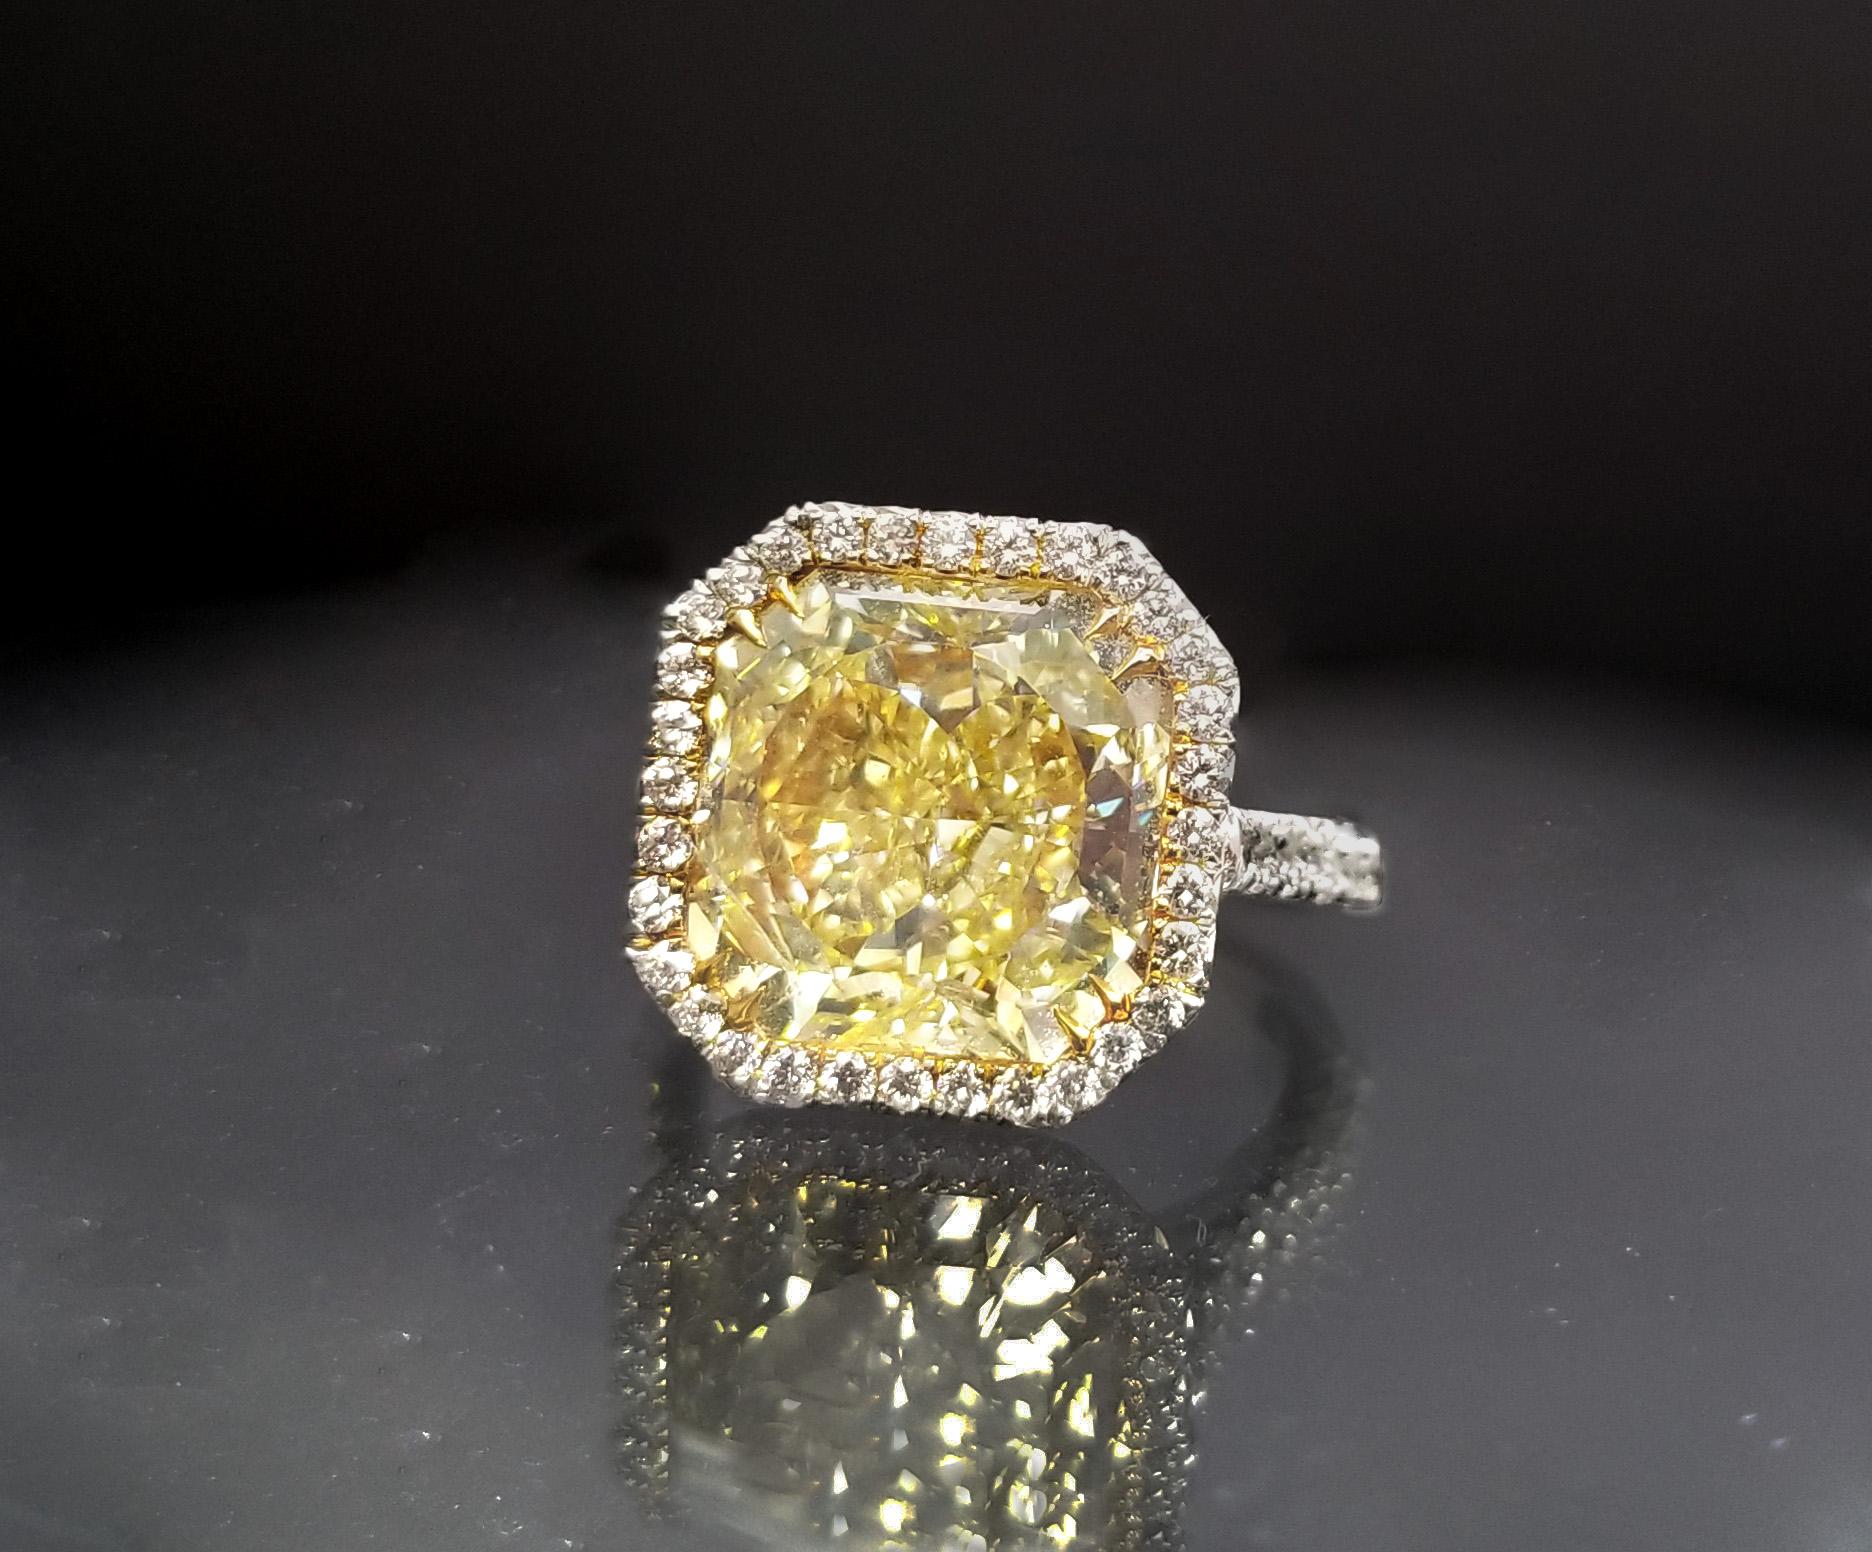 From SCARSELLI, this spectacular 7 carat Fancy Intense Yellow Diamond, with a halo of round white diamonds that spread down on the shank's sides (see certificate pictures for detailed stone information) The mounting is handmade in platinum and 18k